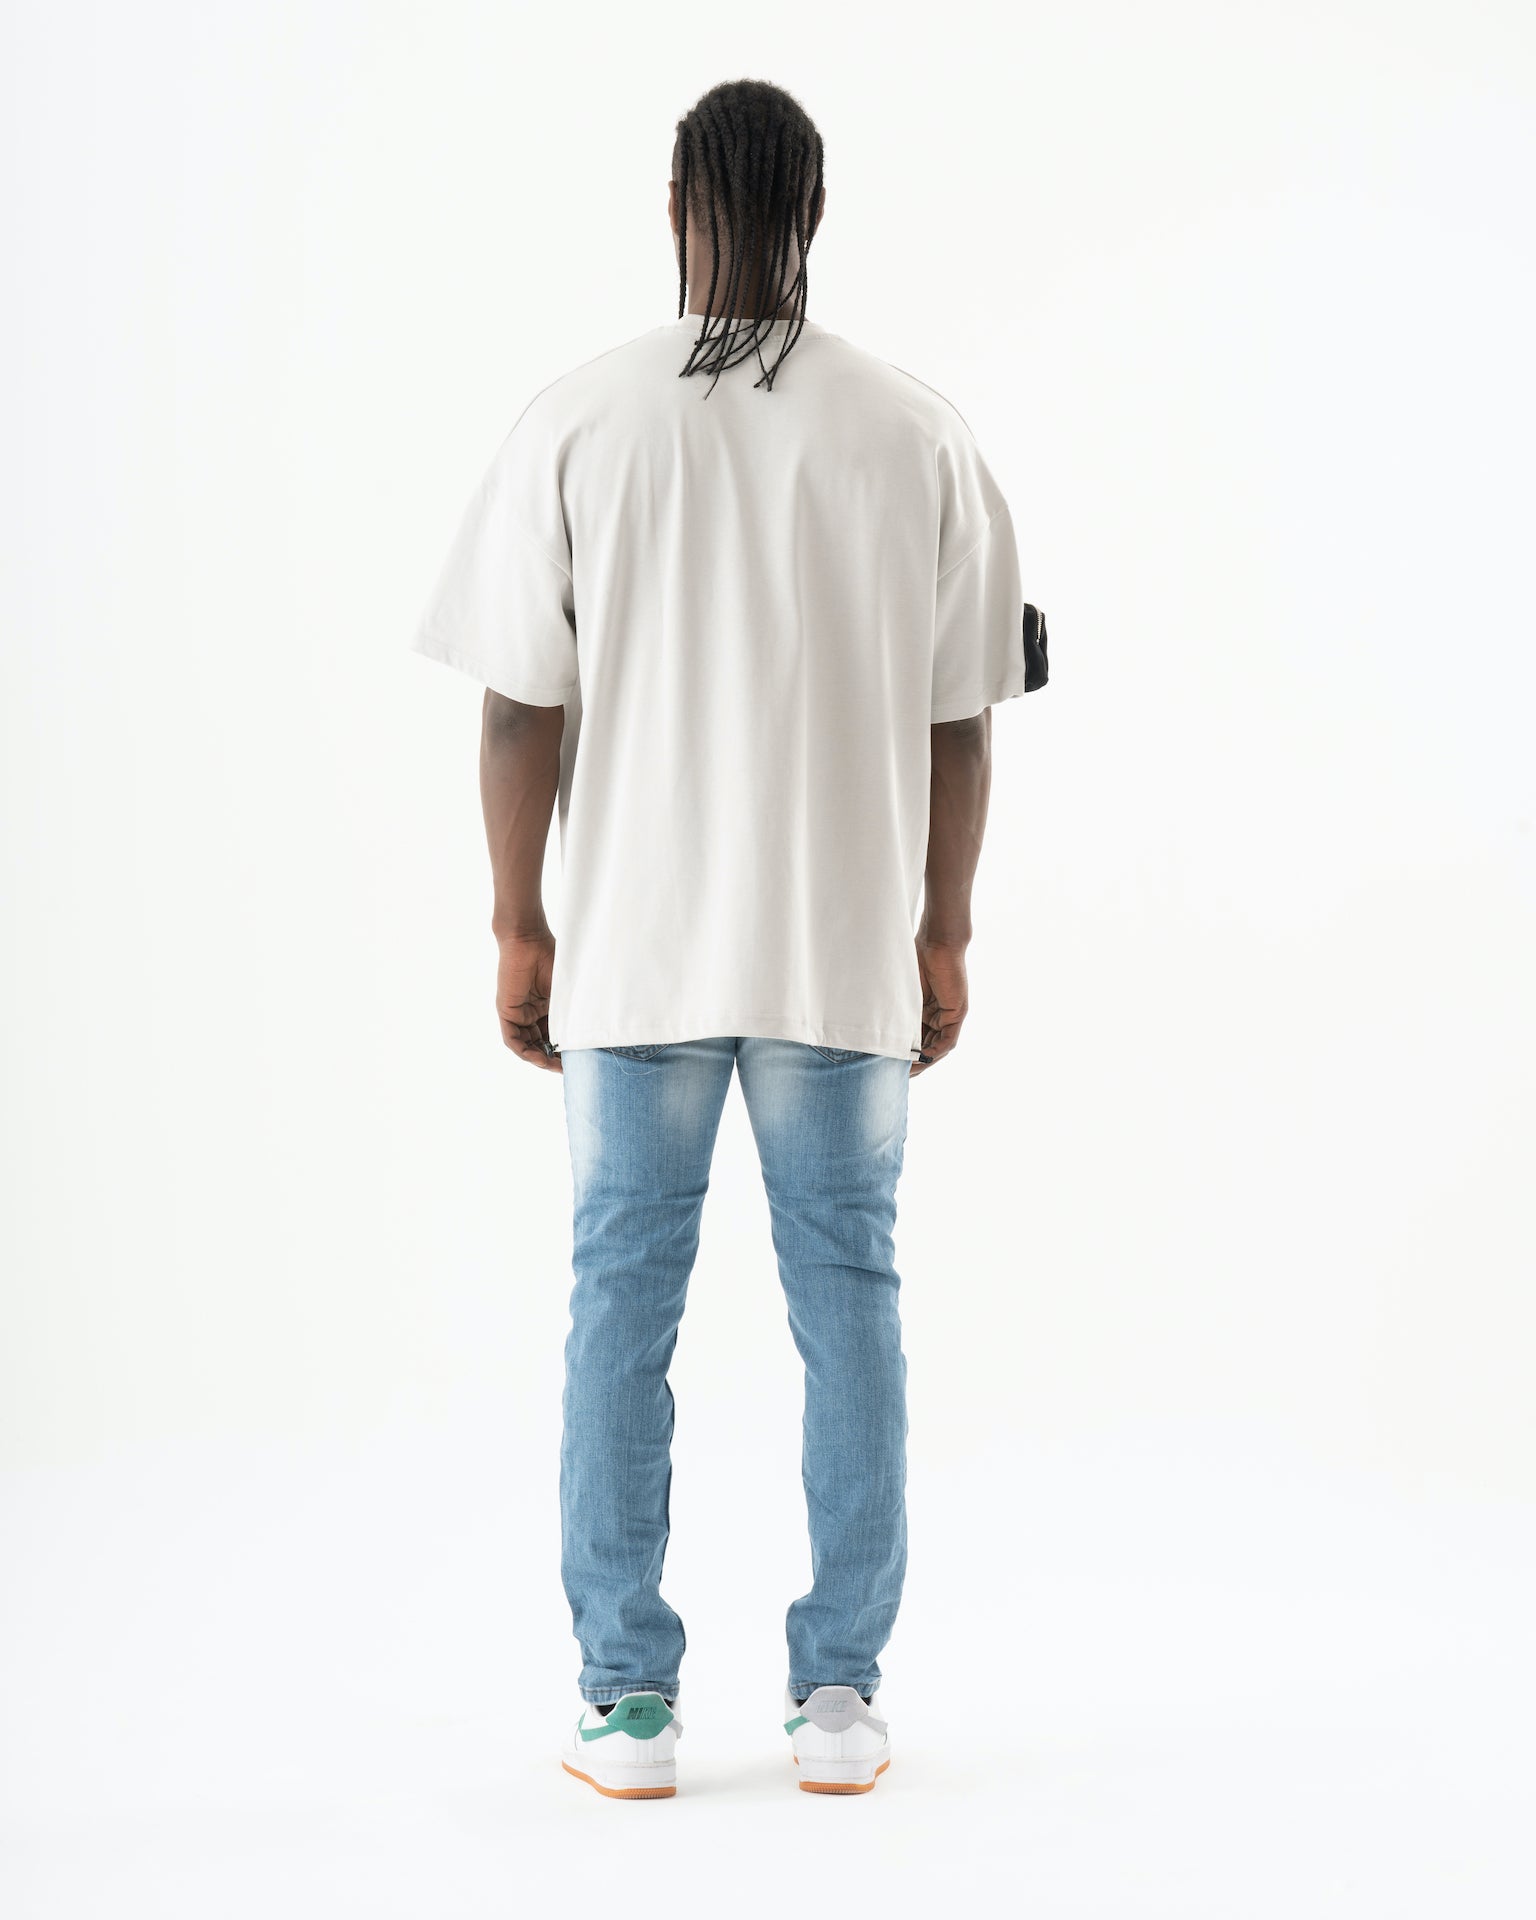 The back view of a man wearing the SKATER Jeans.